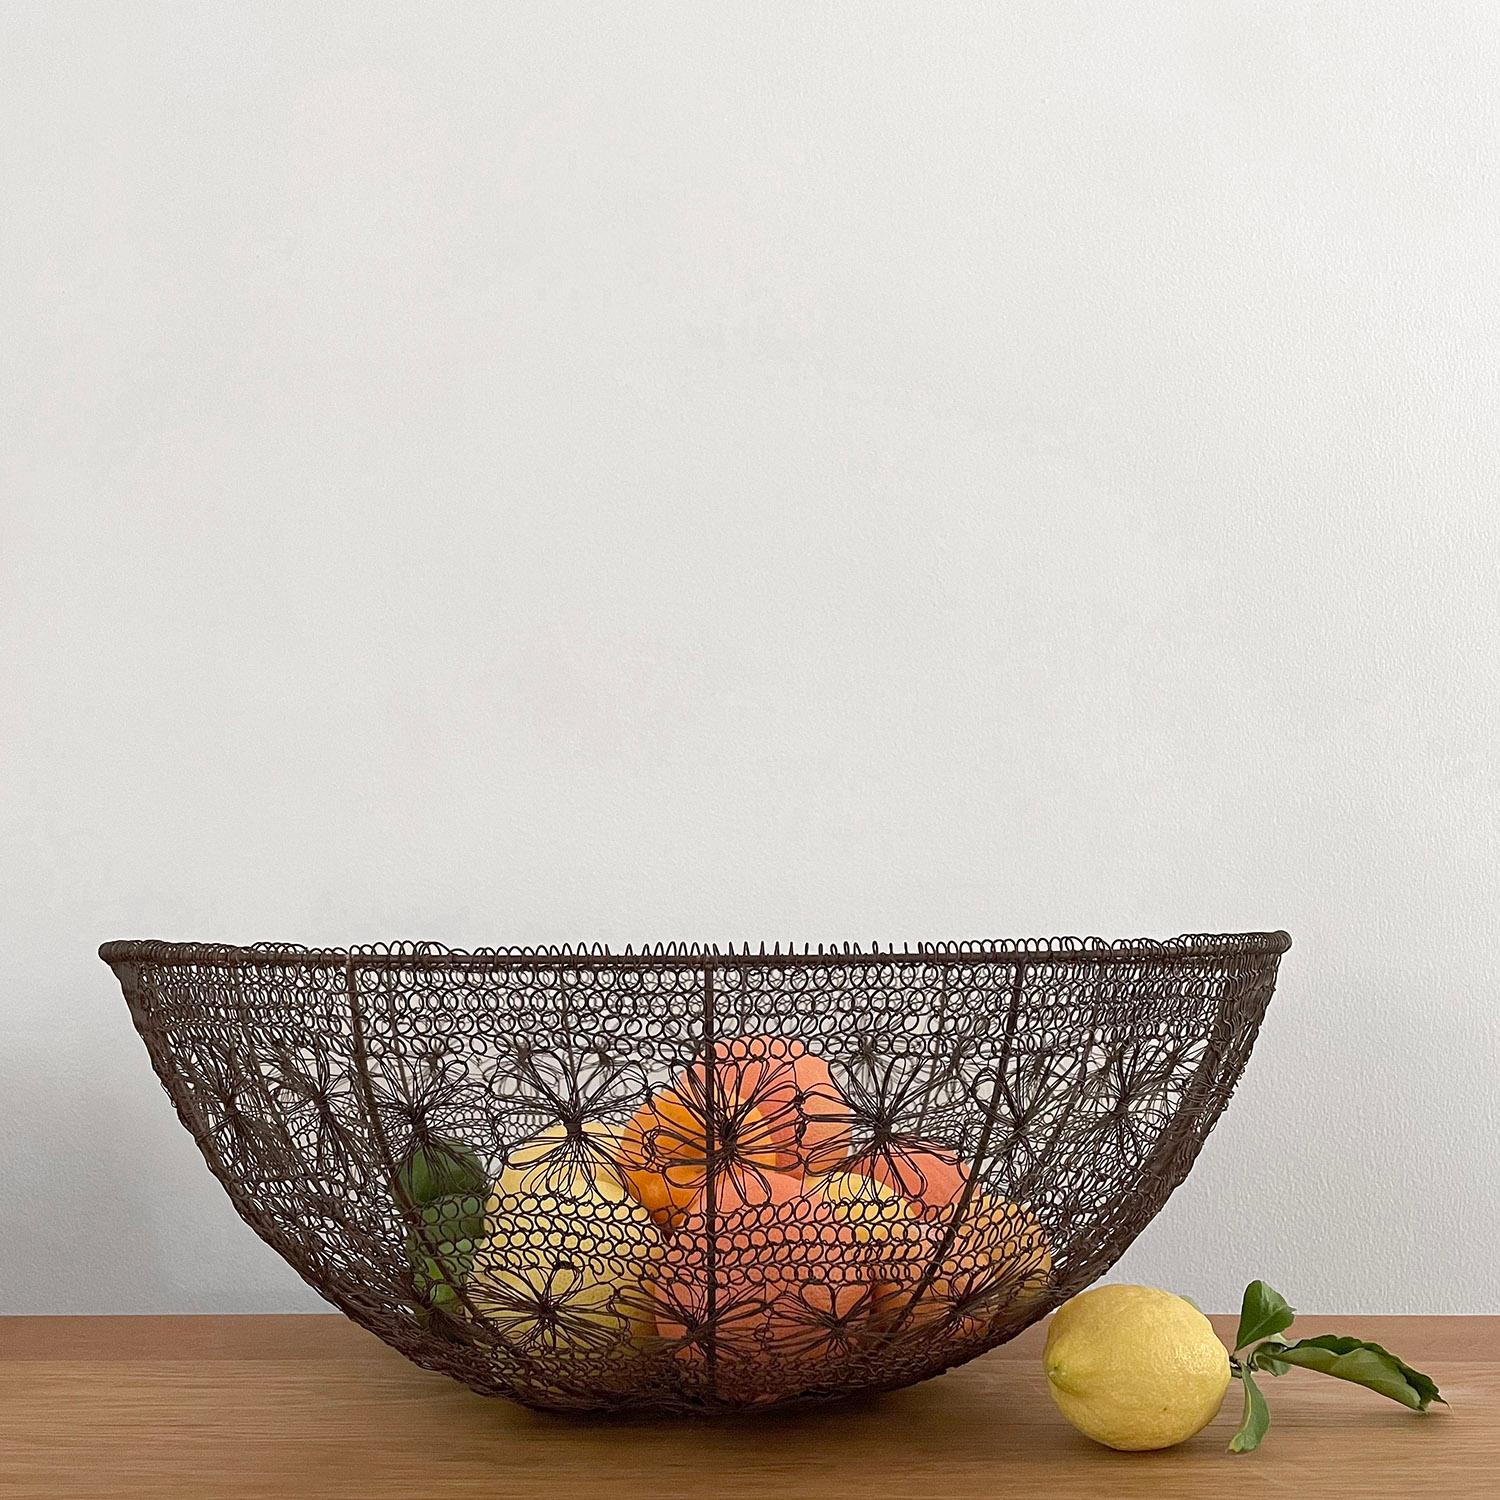 Rustic French metal floral mesh oversized basket 
Handcrafted artisanal piece 
Intricately woven wire mesh constructed in a series of rings
Each ring is made up of tiny interlocking loops or flowers 
Finished with a coiled banding detail
This large